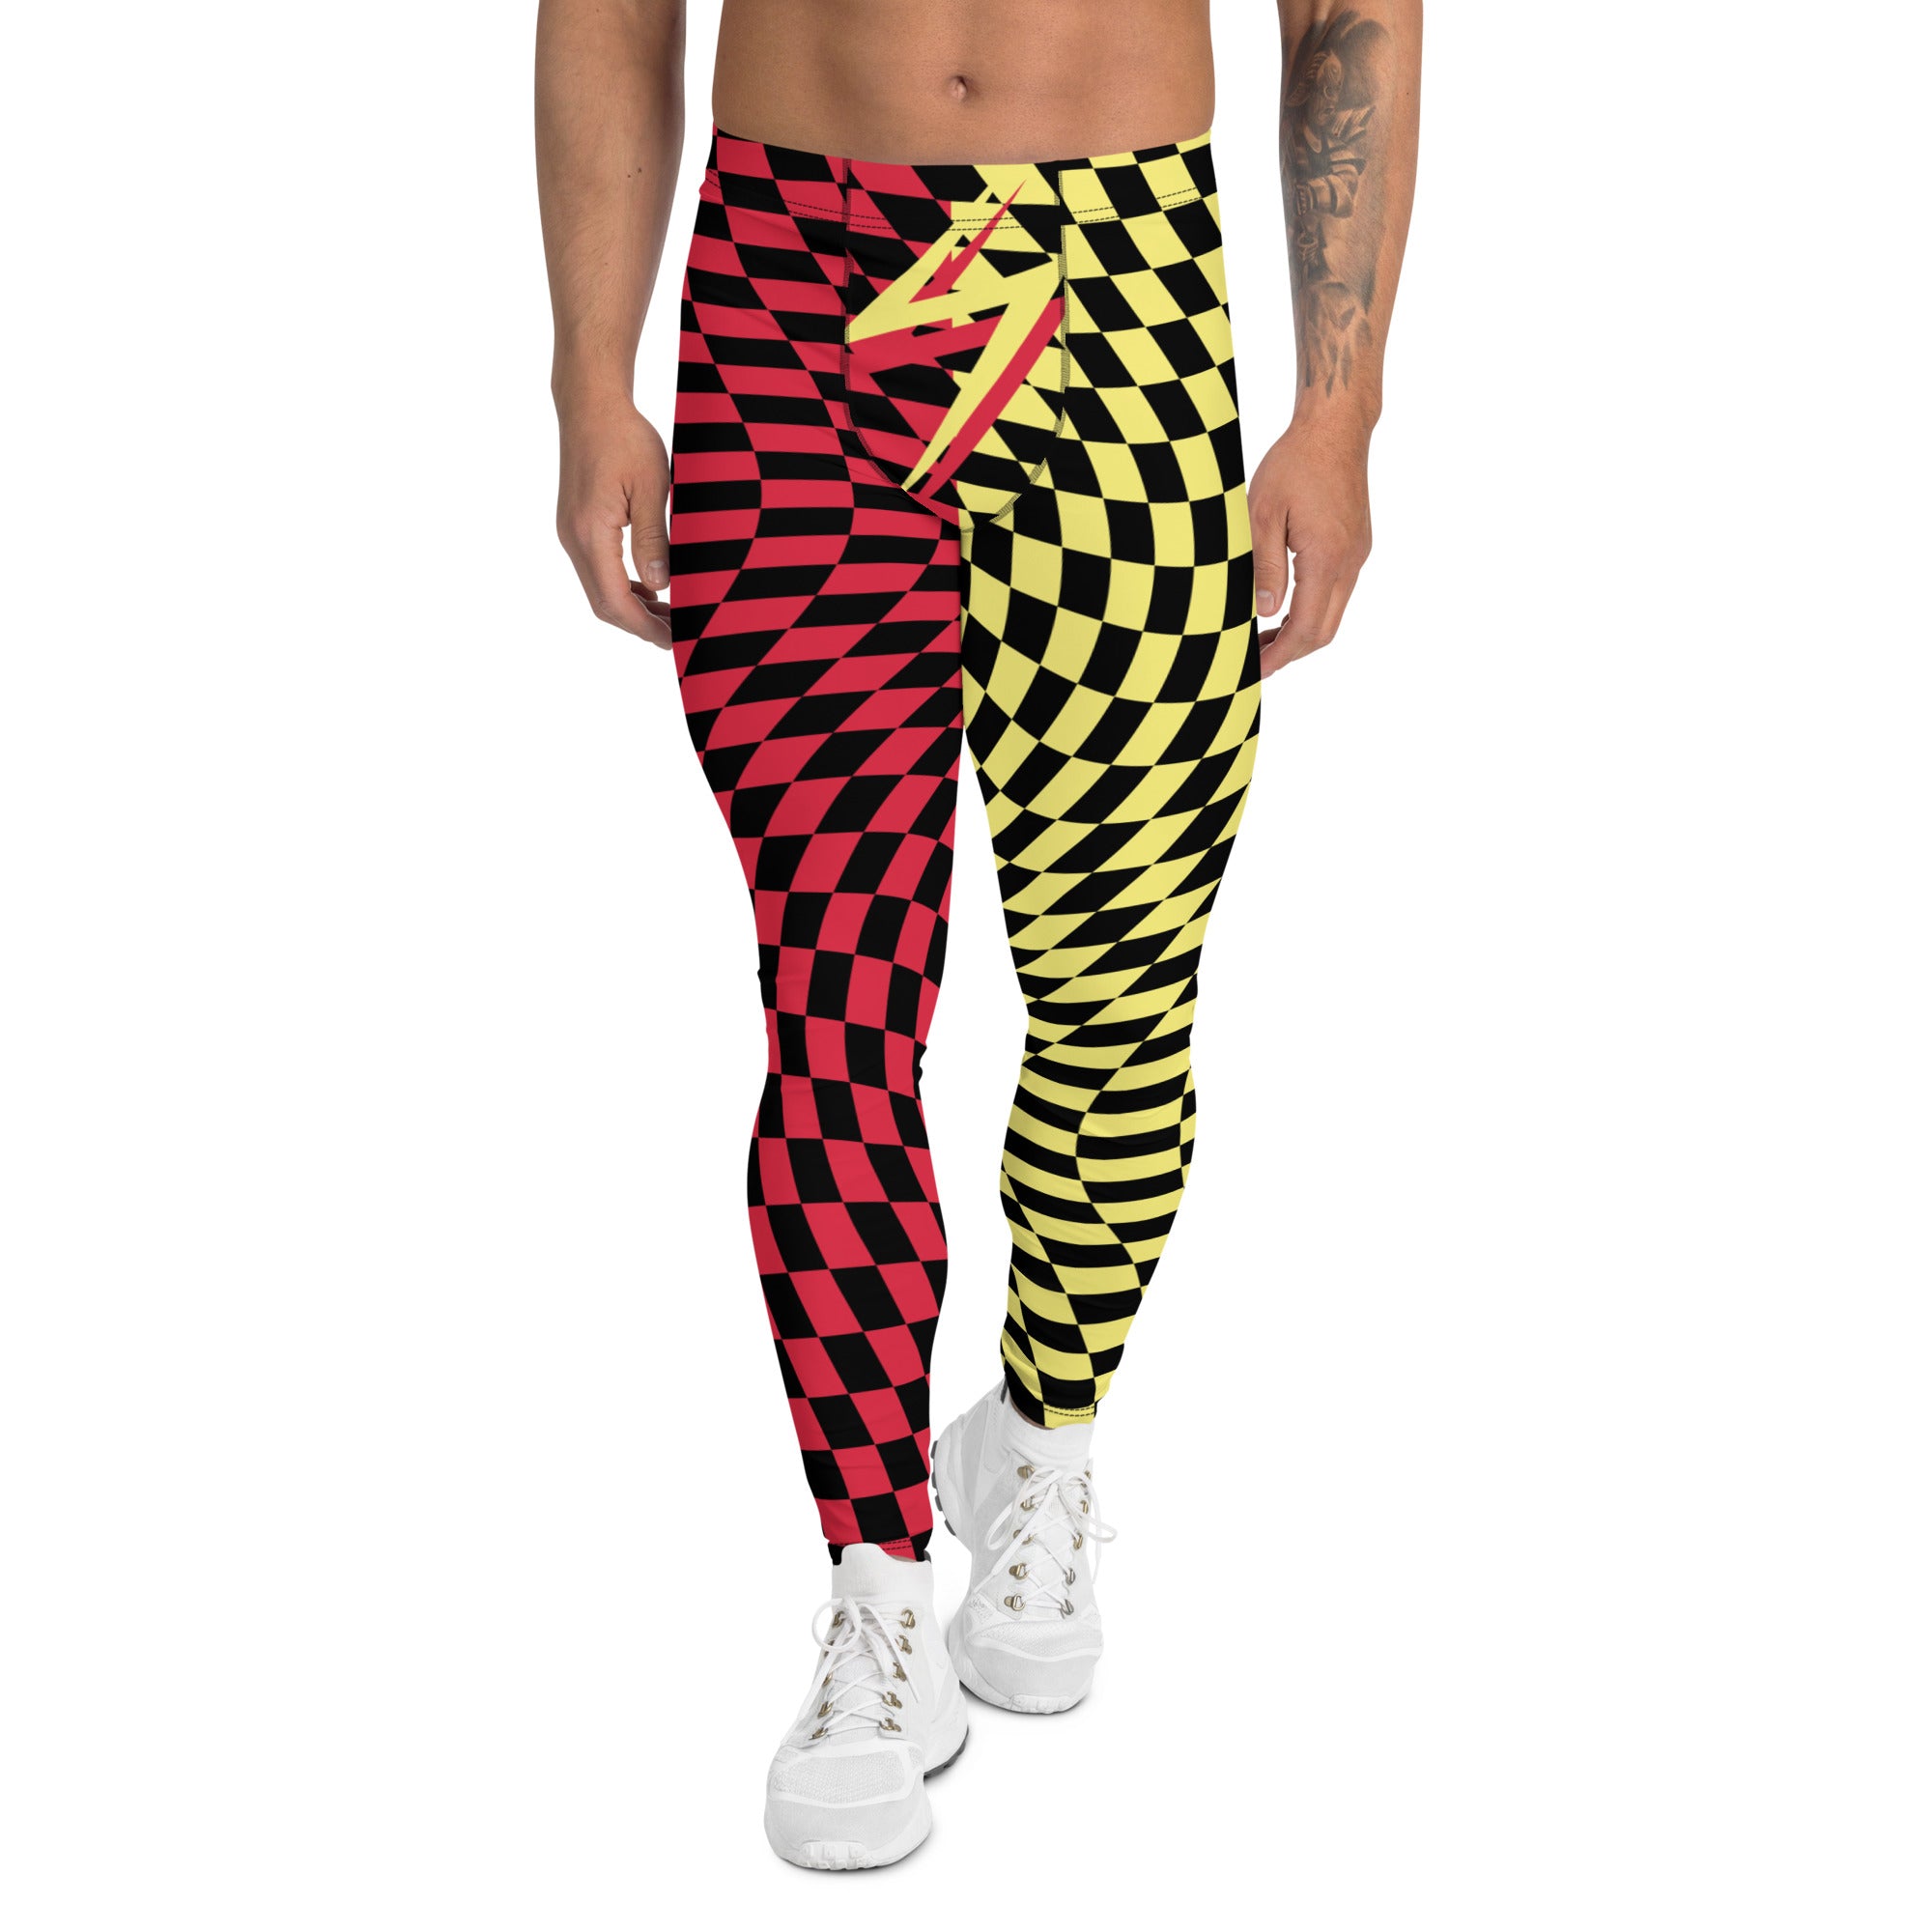 Checkered Pattern Pants, Red and White Checkered, leggings, pants,  patterned, pattern, abstract, Print-all-over, Yoga Leggings